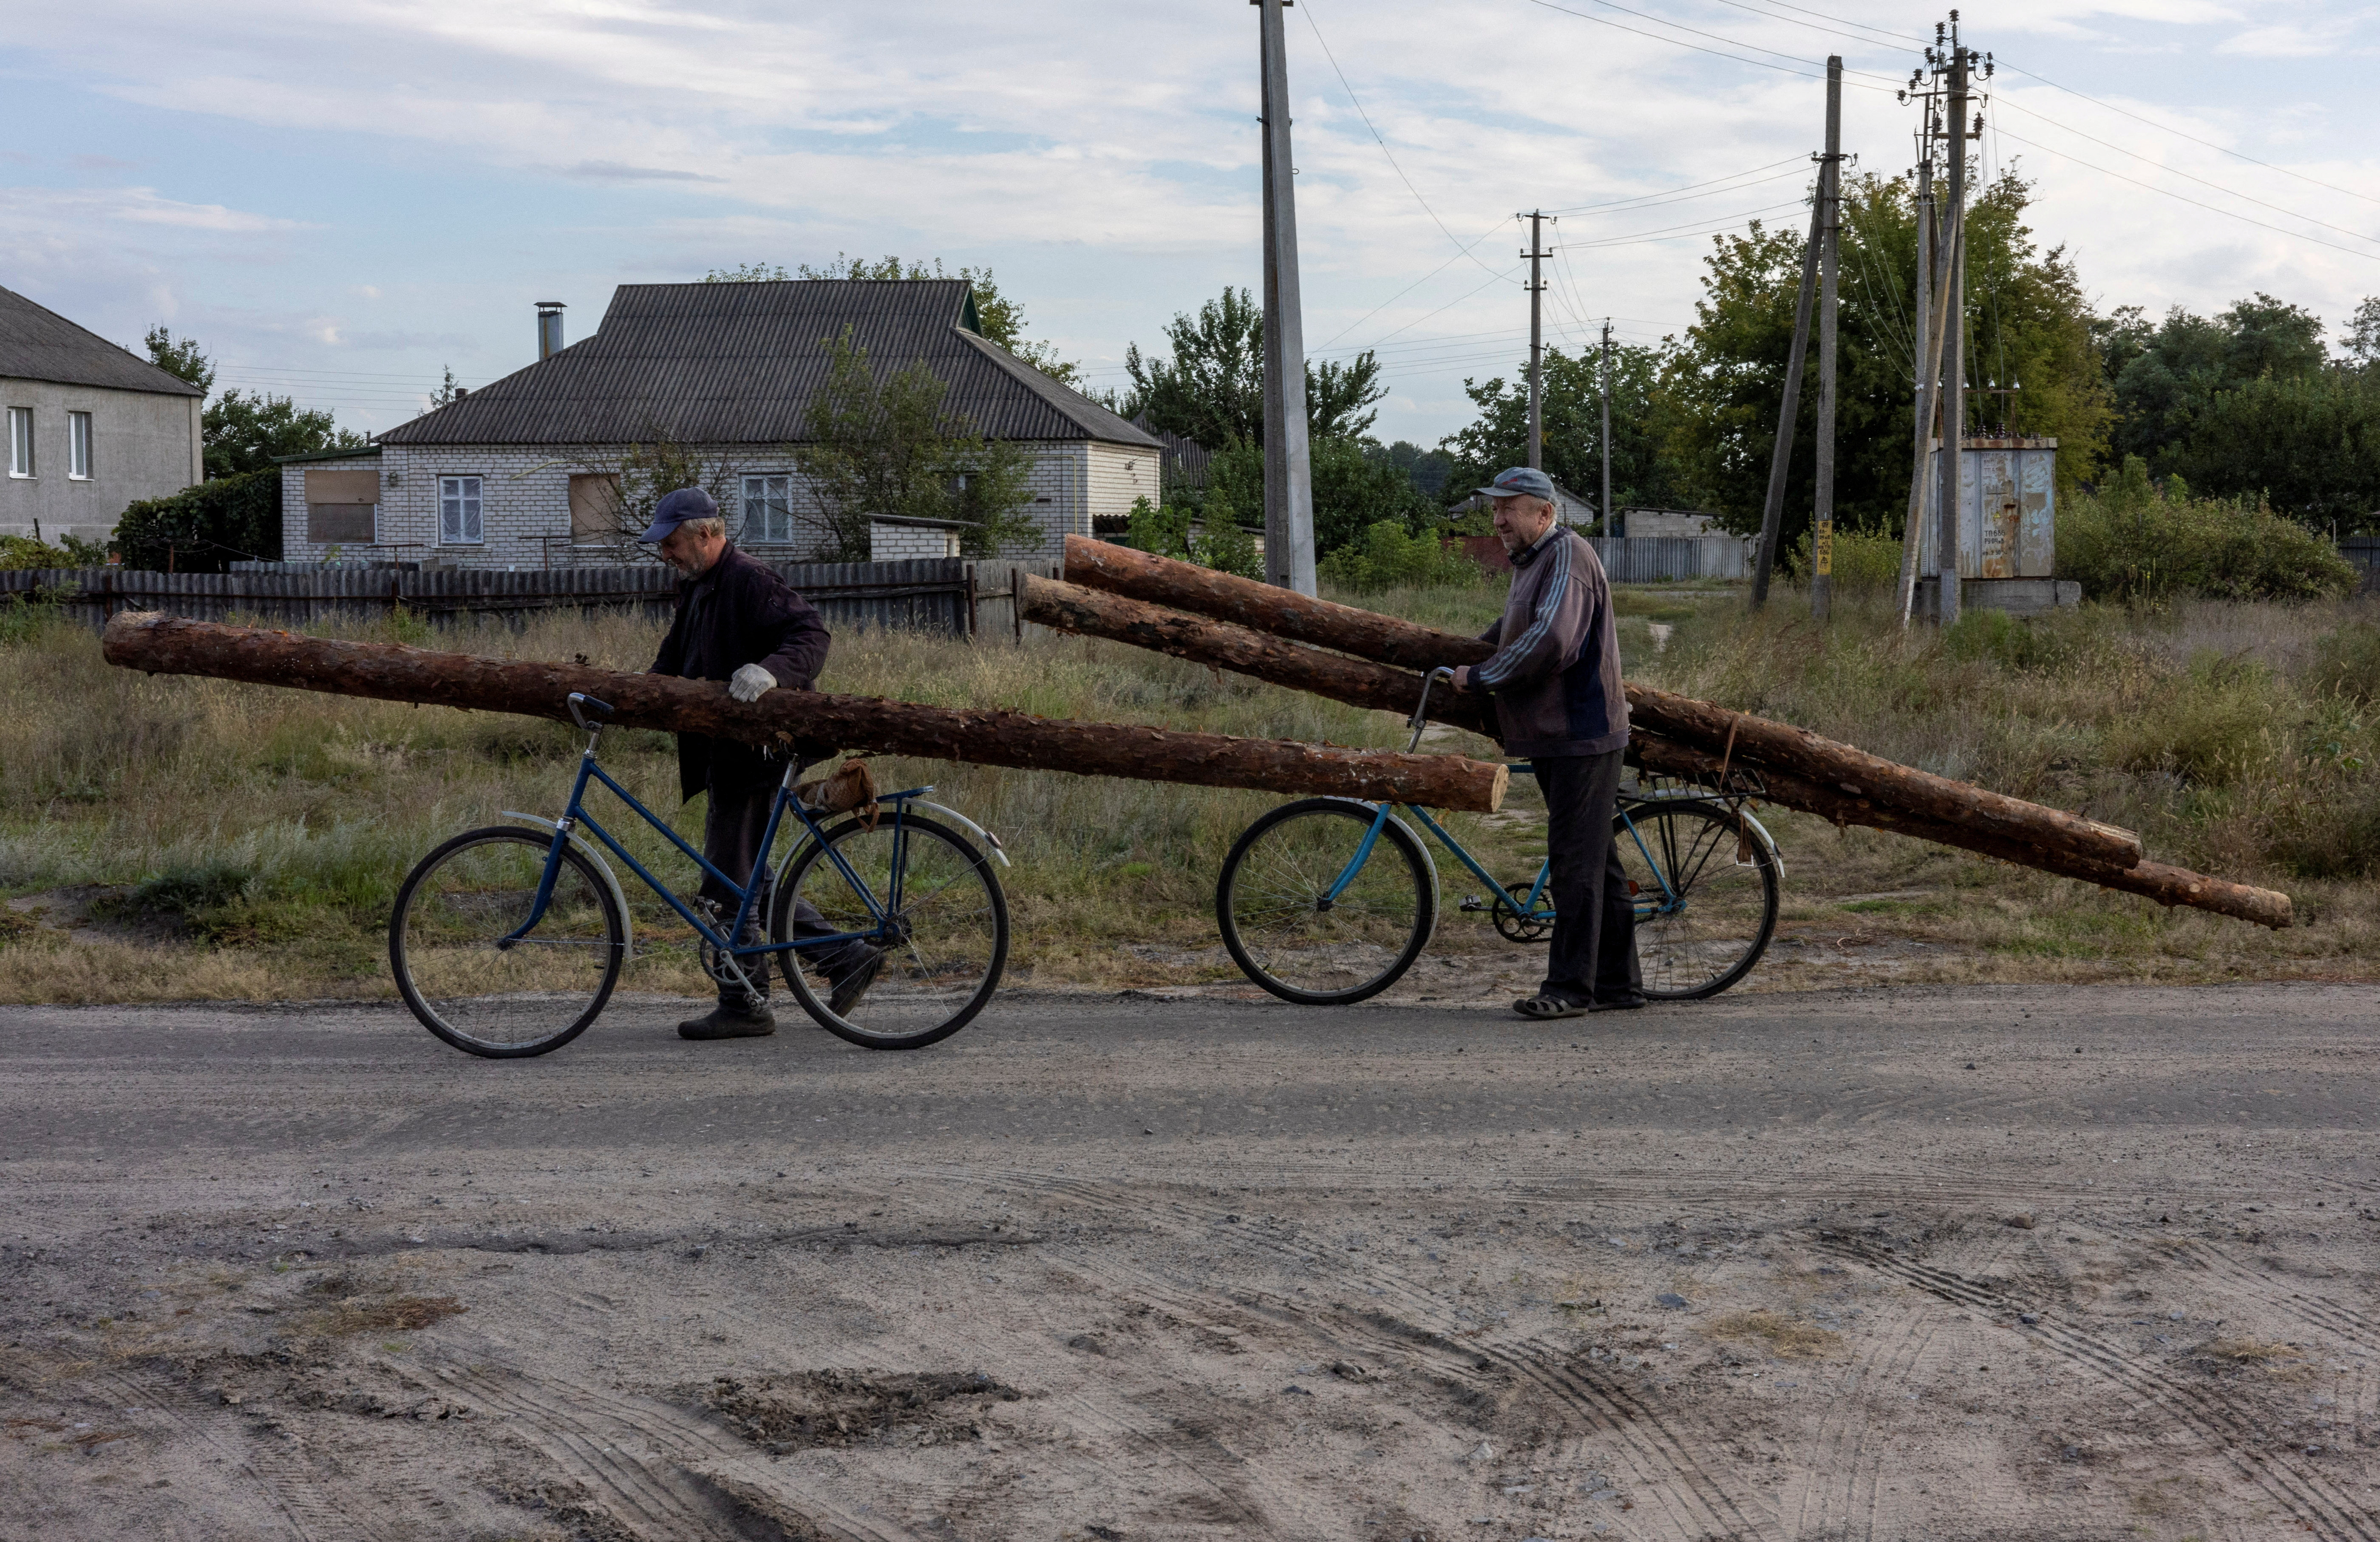 Men carry wood collected from abandoned Russian military bunkers, on their bicycles to use for heating during the winter, in Izium